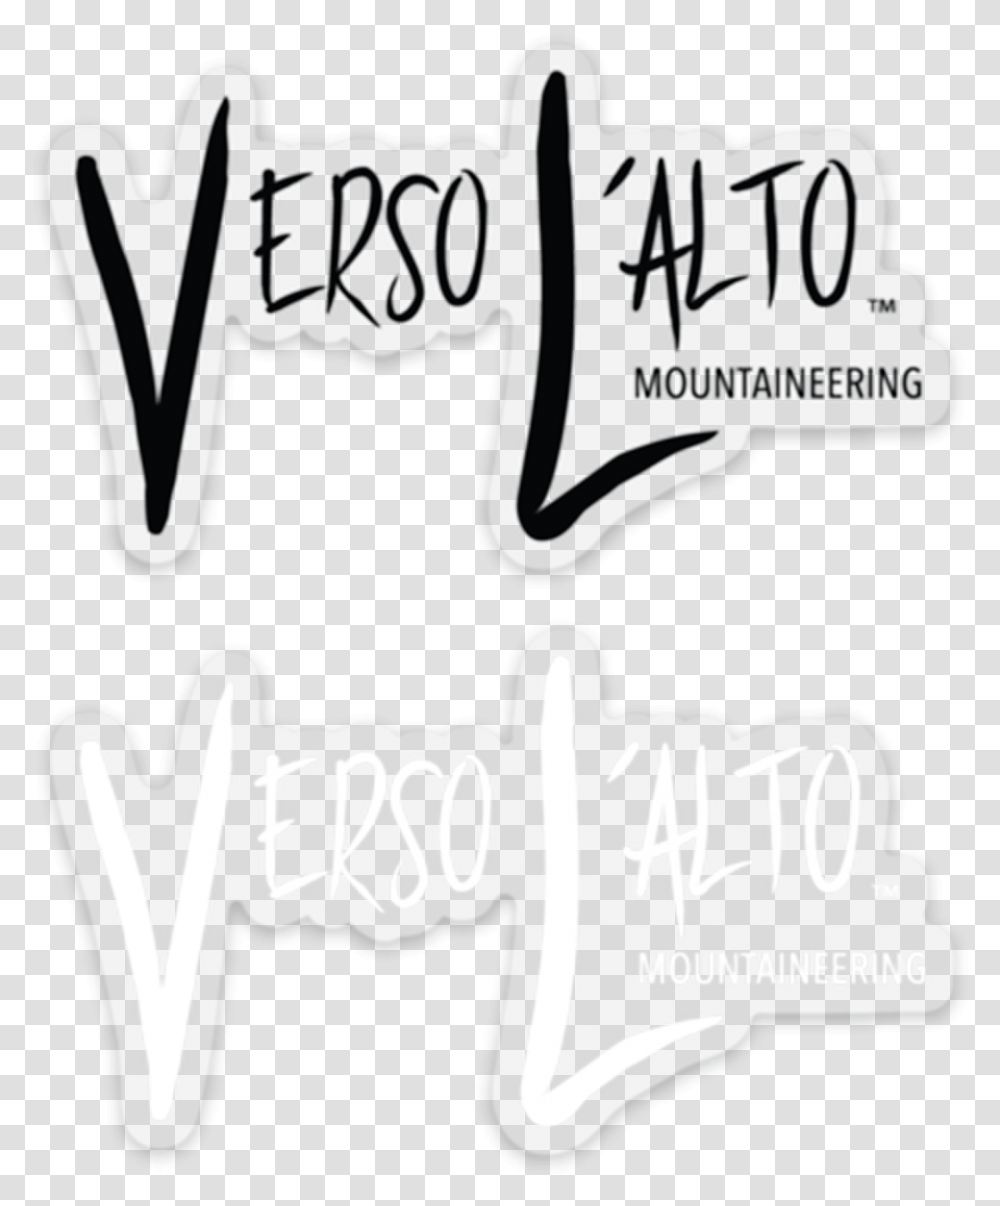 Verso Lalto Mountaineering Logo Calligraphy, Text, Label, Poster, Advertisement Transparent Png